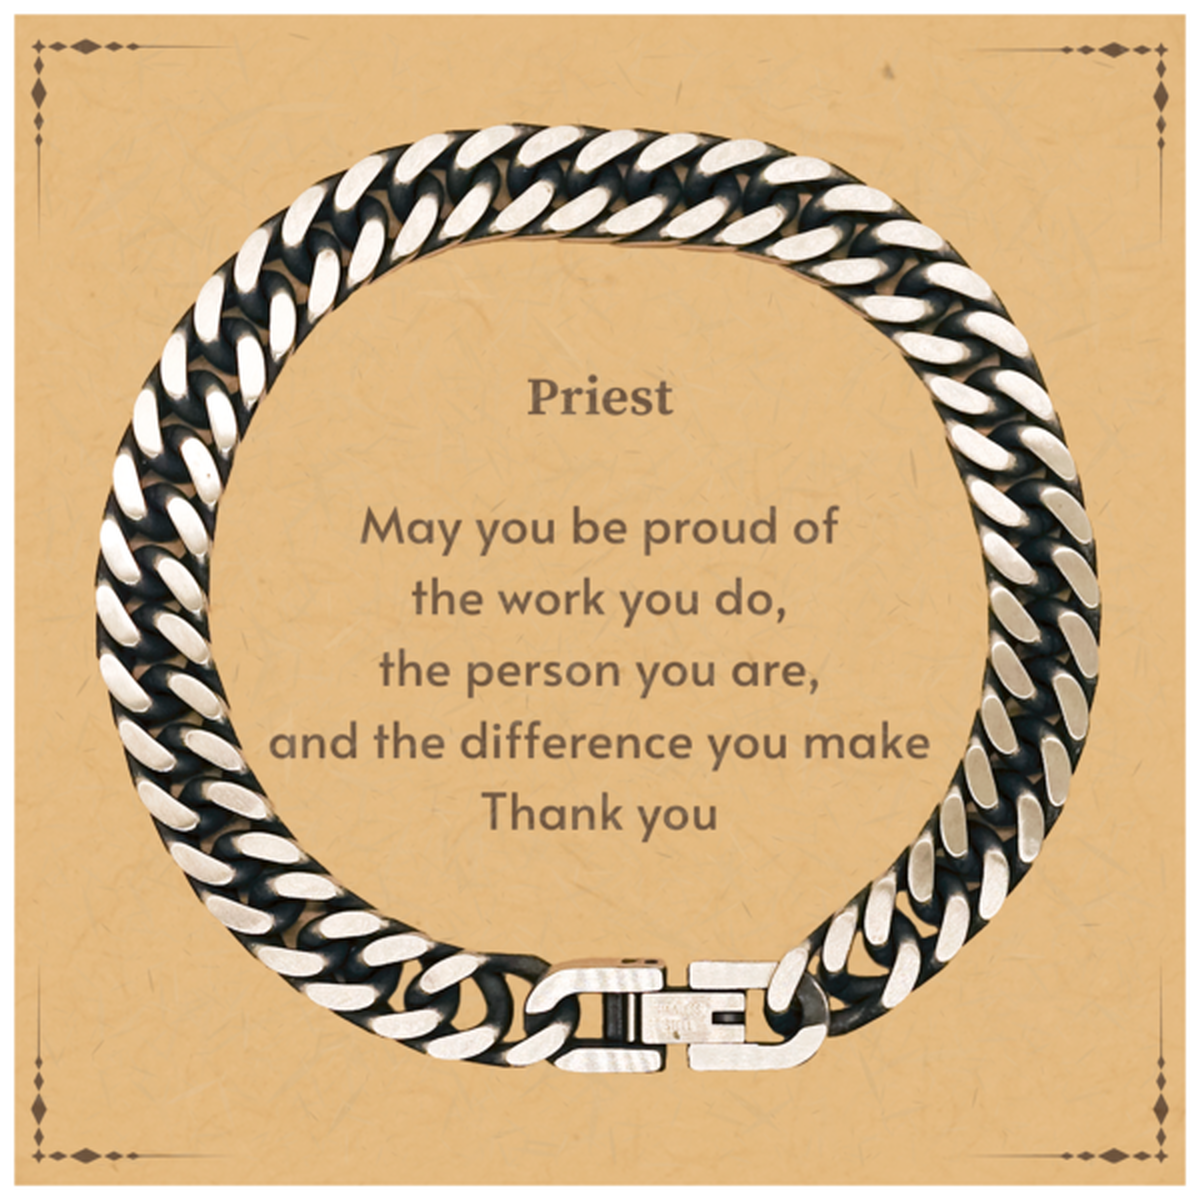 Heartwarming Cuban Link Chain Bracelet Retirement Coworkers Gifts for Priest, Priest May You be proud of the work you do, the person you are Gifts for Boss Men Women Friends